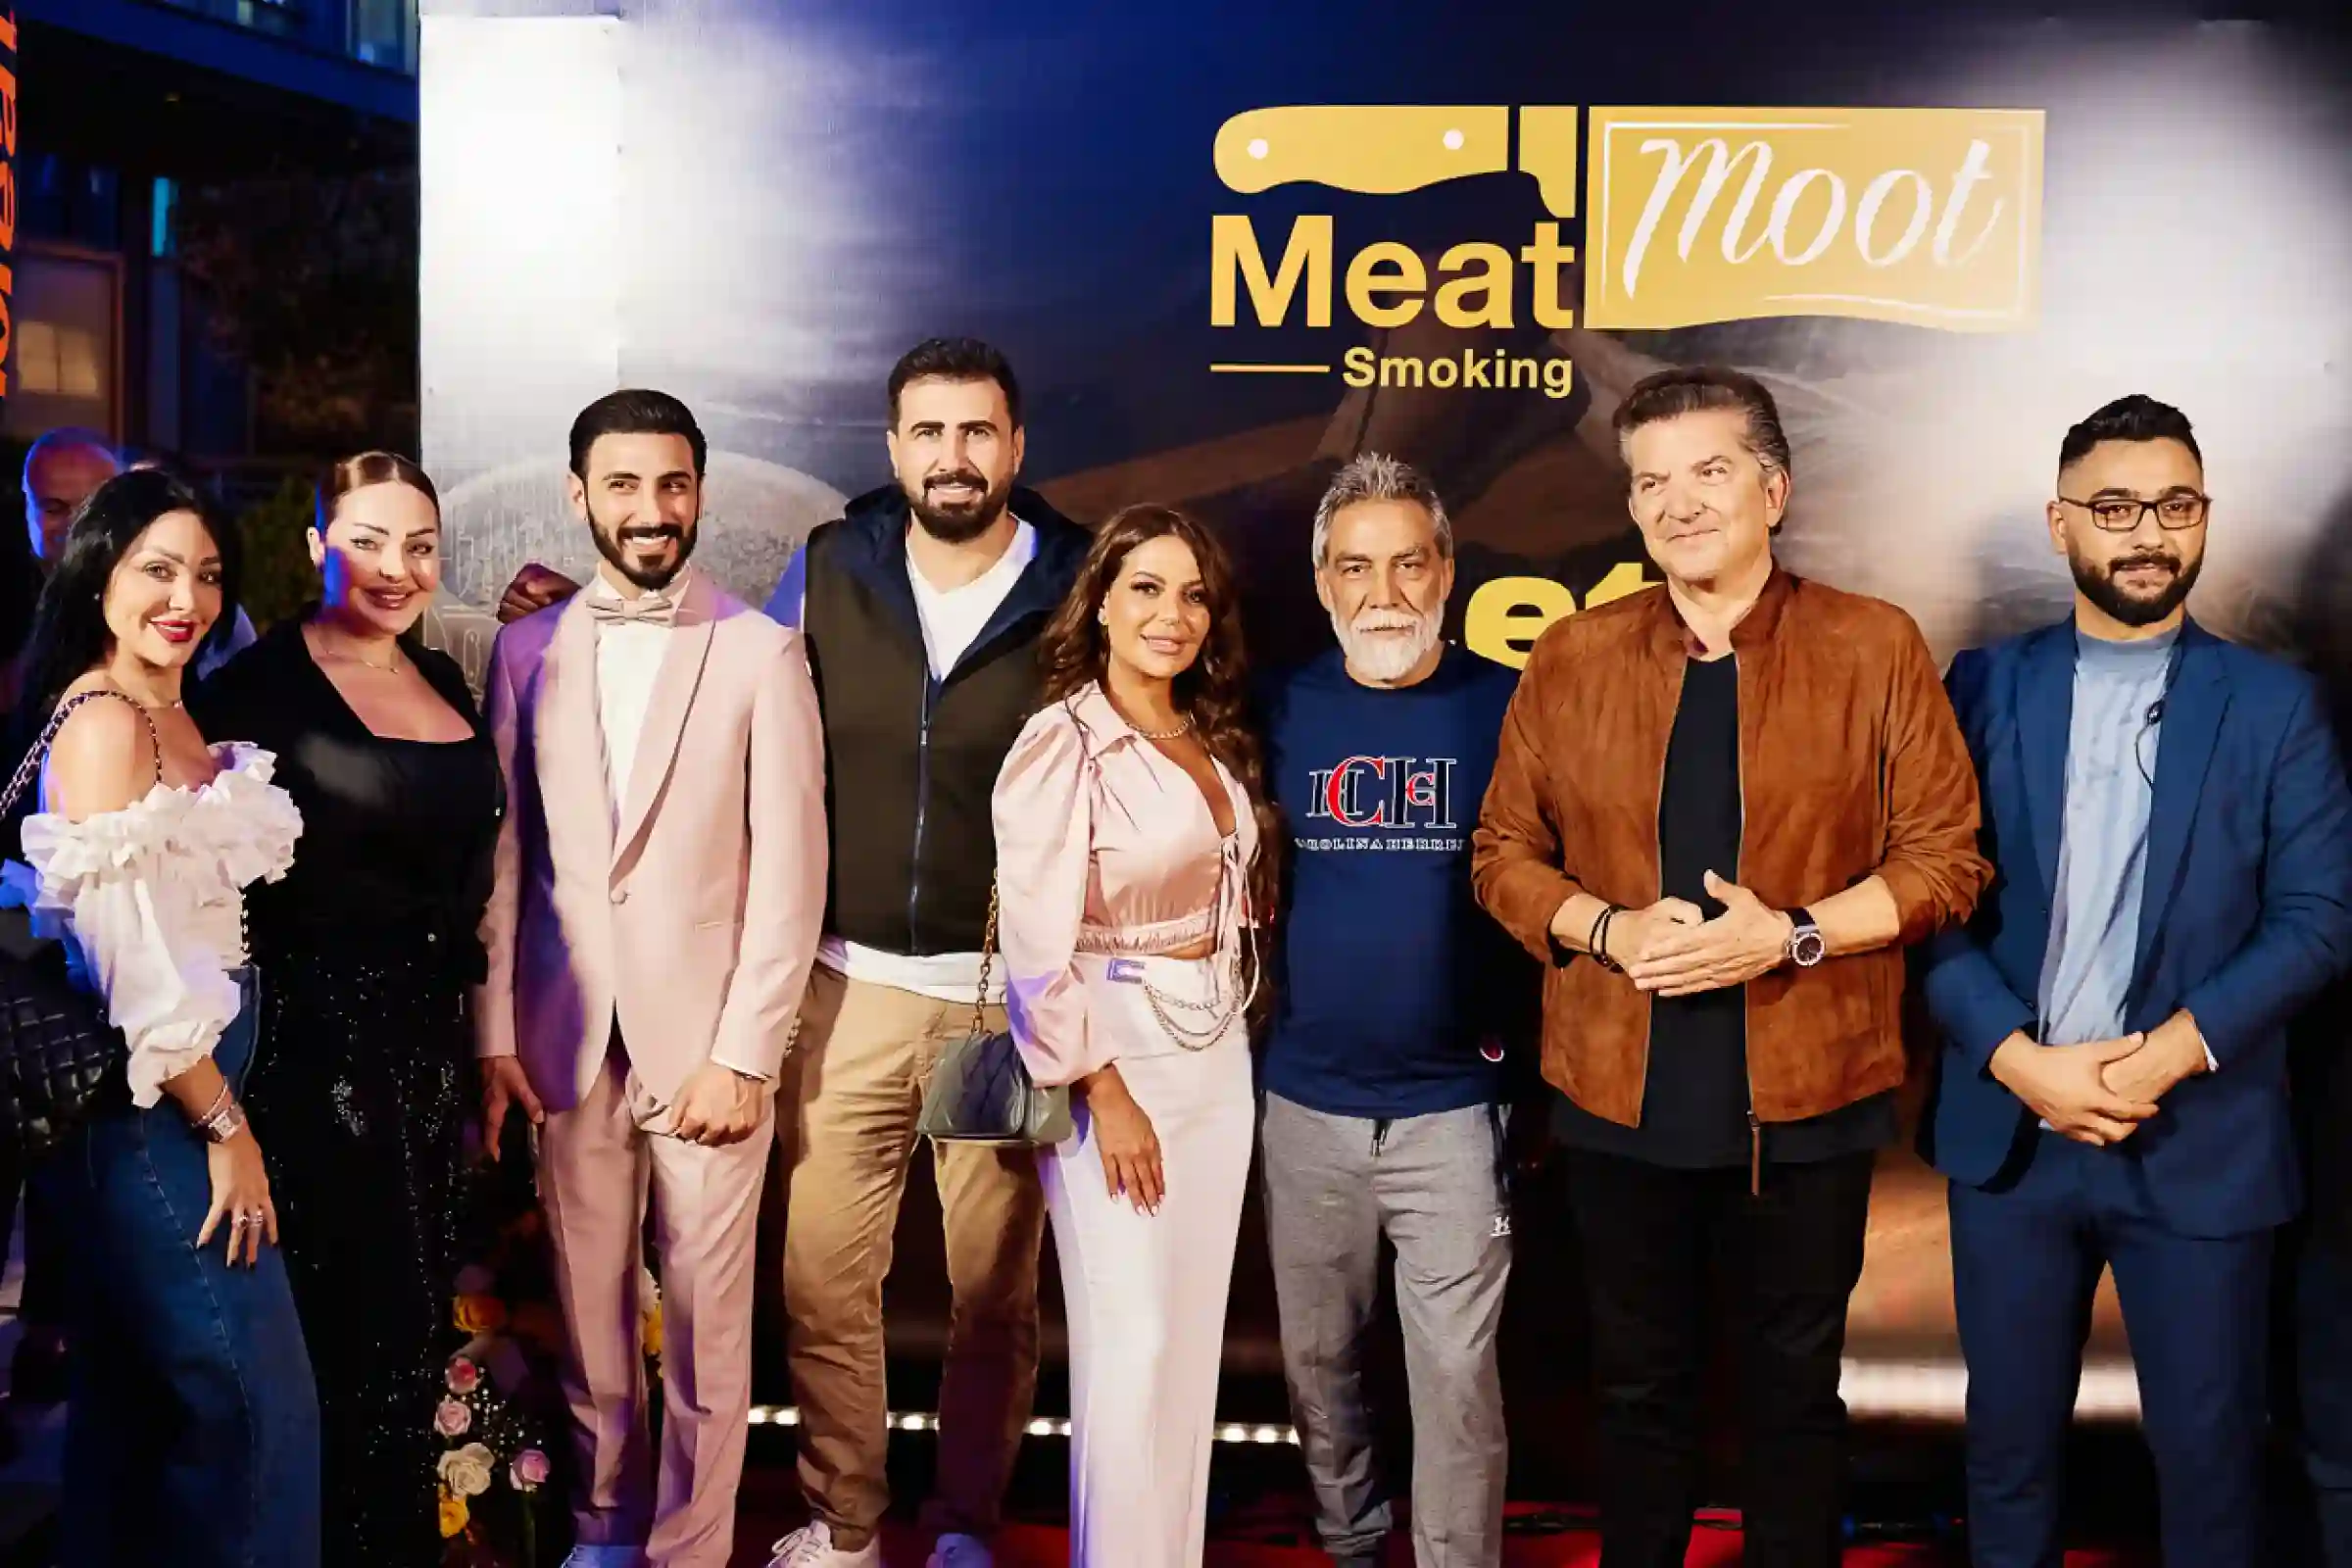 famous singers and actors in meat moot best restaurant for smoked meat, join us